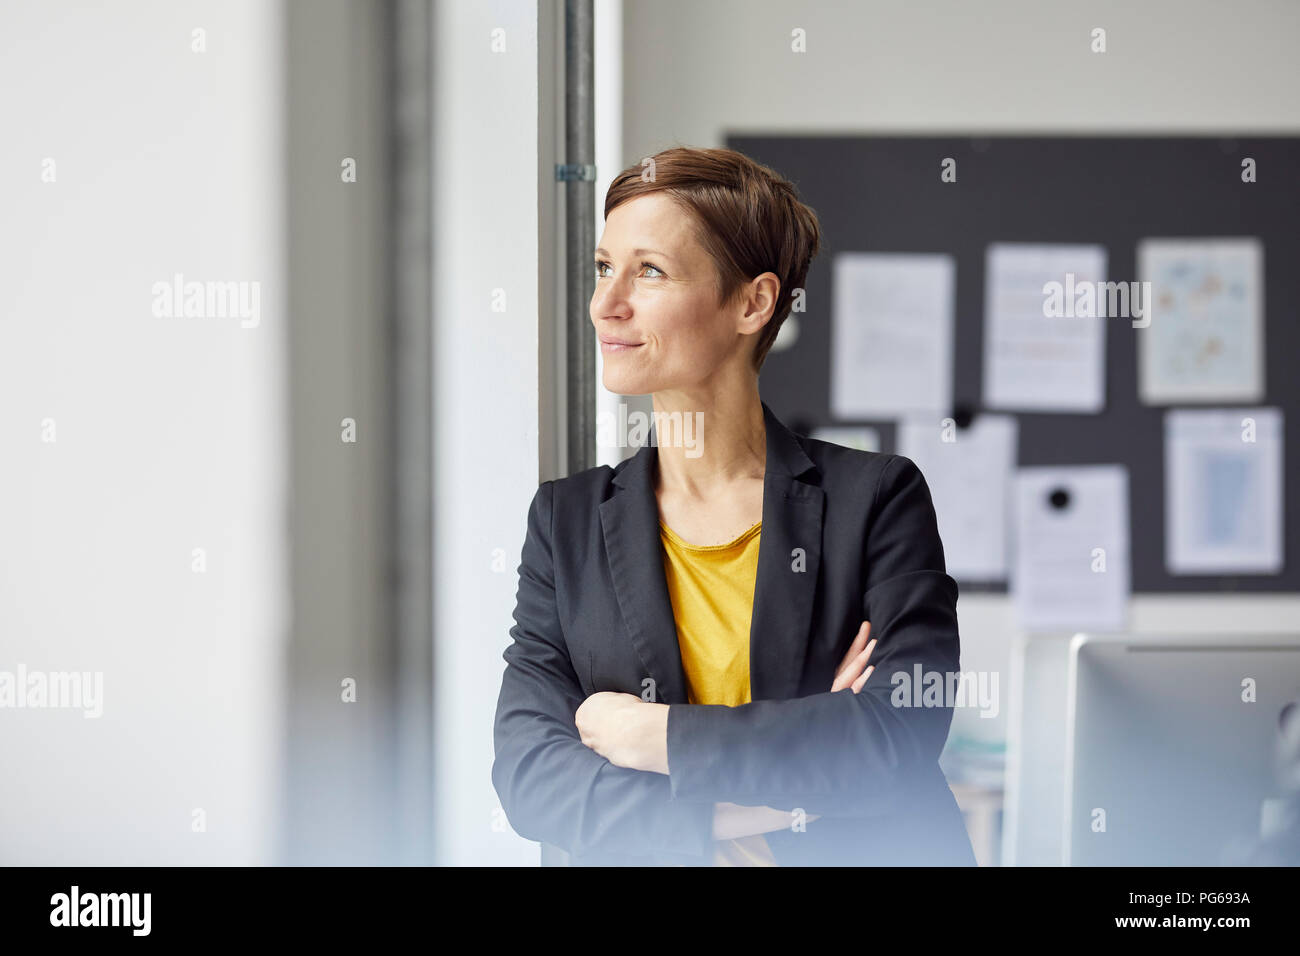 Attractive businesswoman standing in office with arms crossed Stock Photo